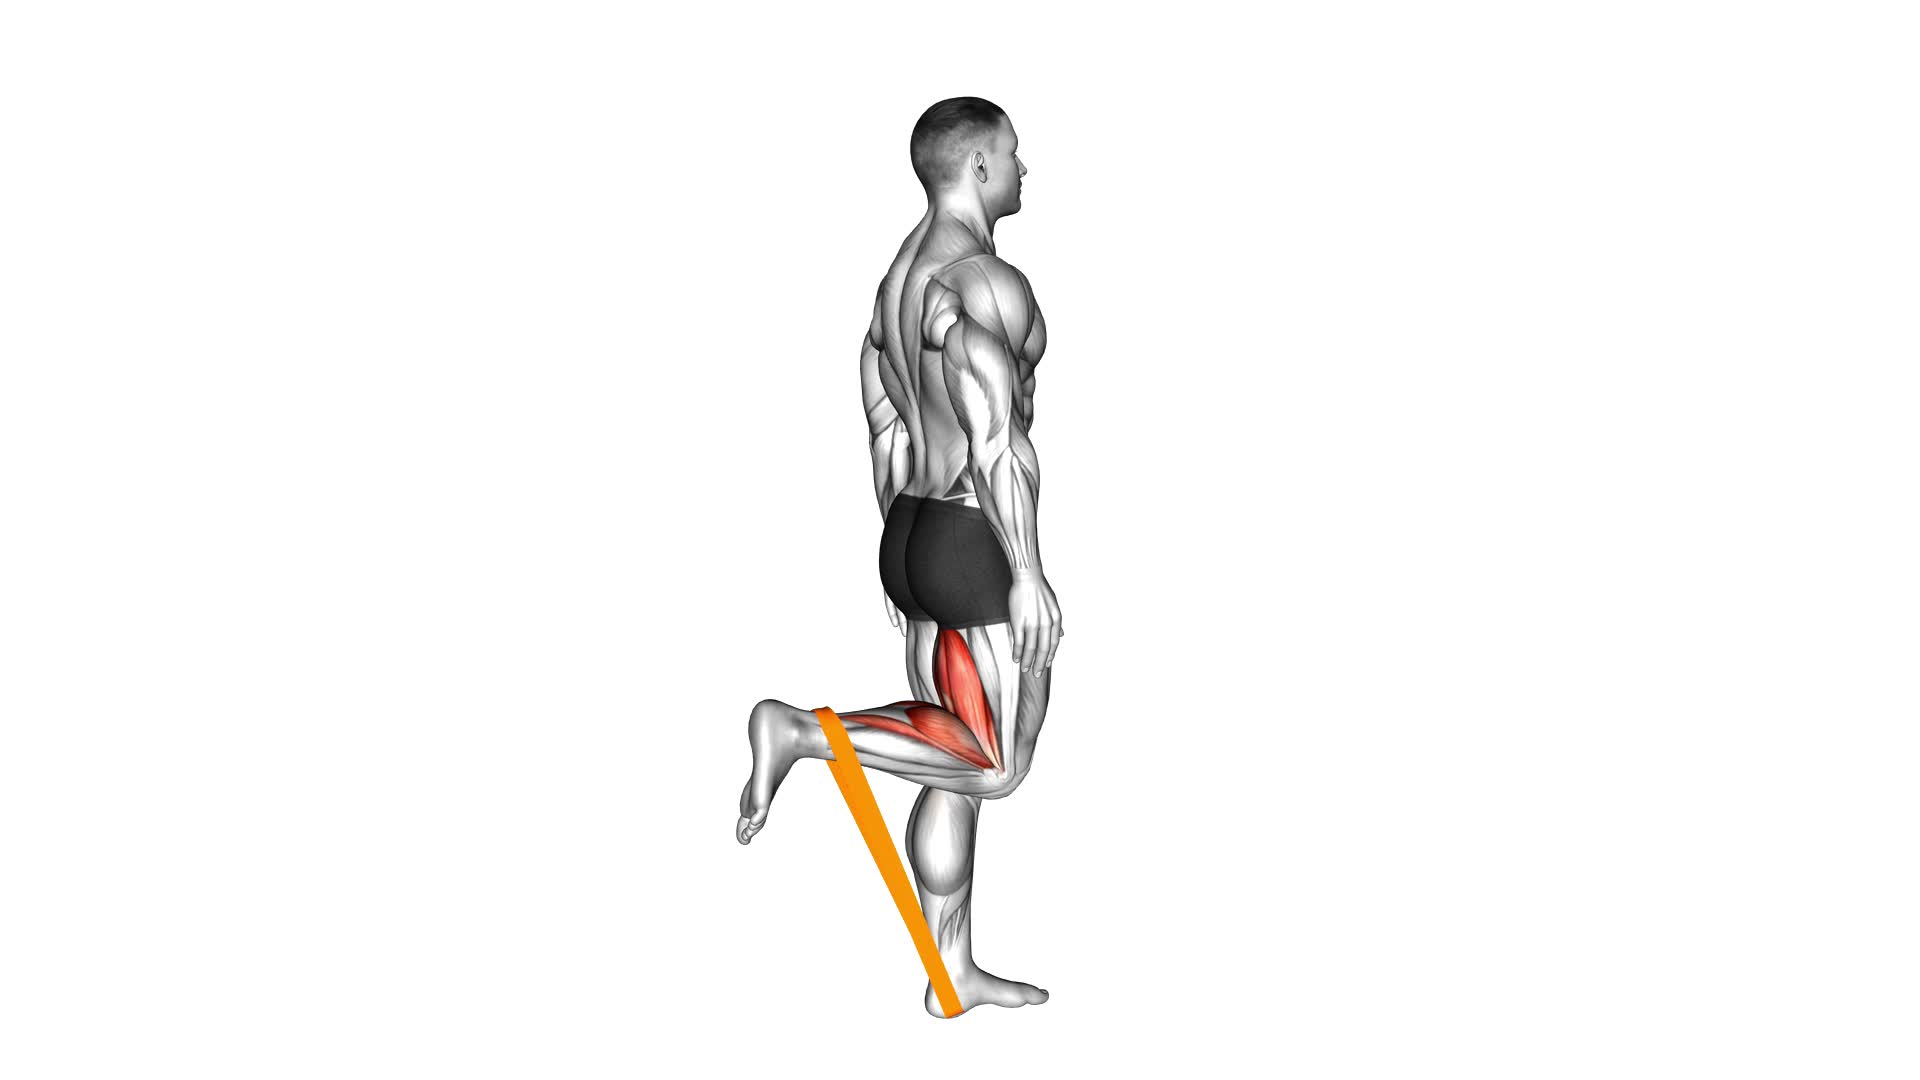 Resistance Band Leg Curl (male) - Video Exercise Guide & Tips